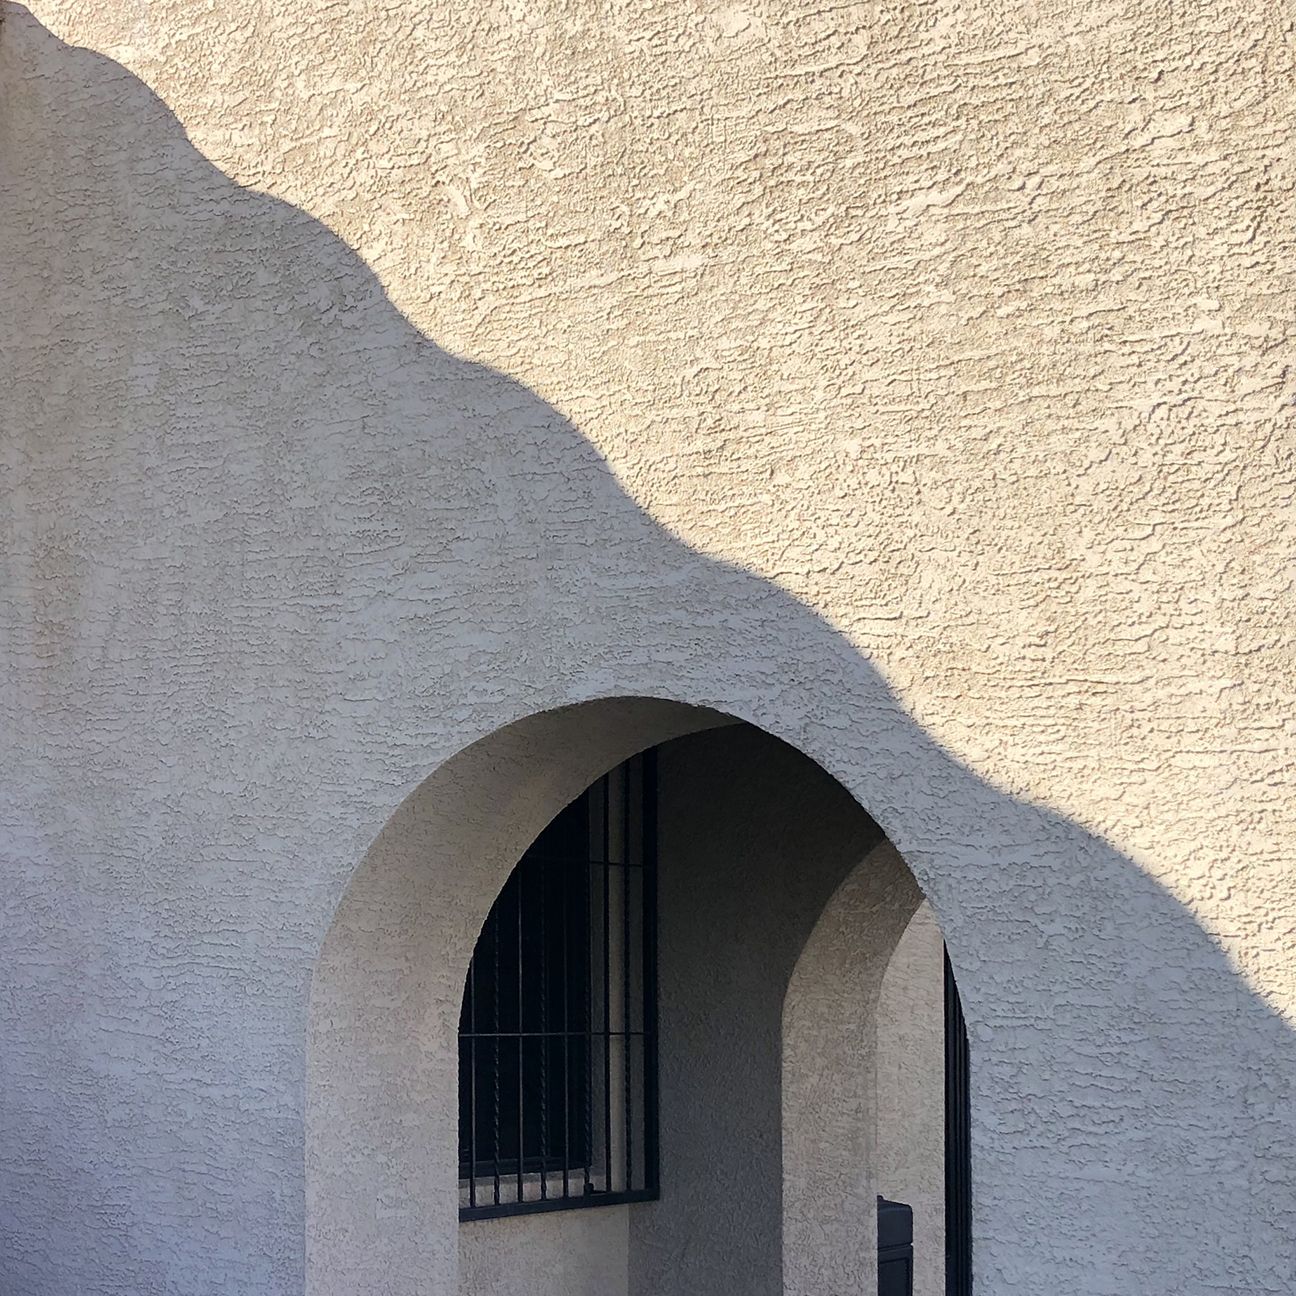 shadow on concrete wall with arch